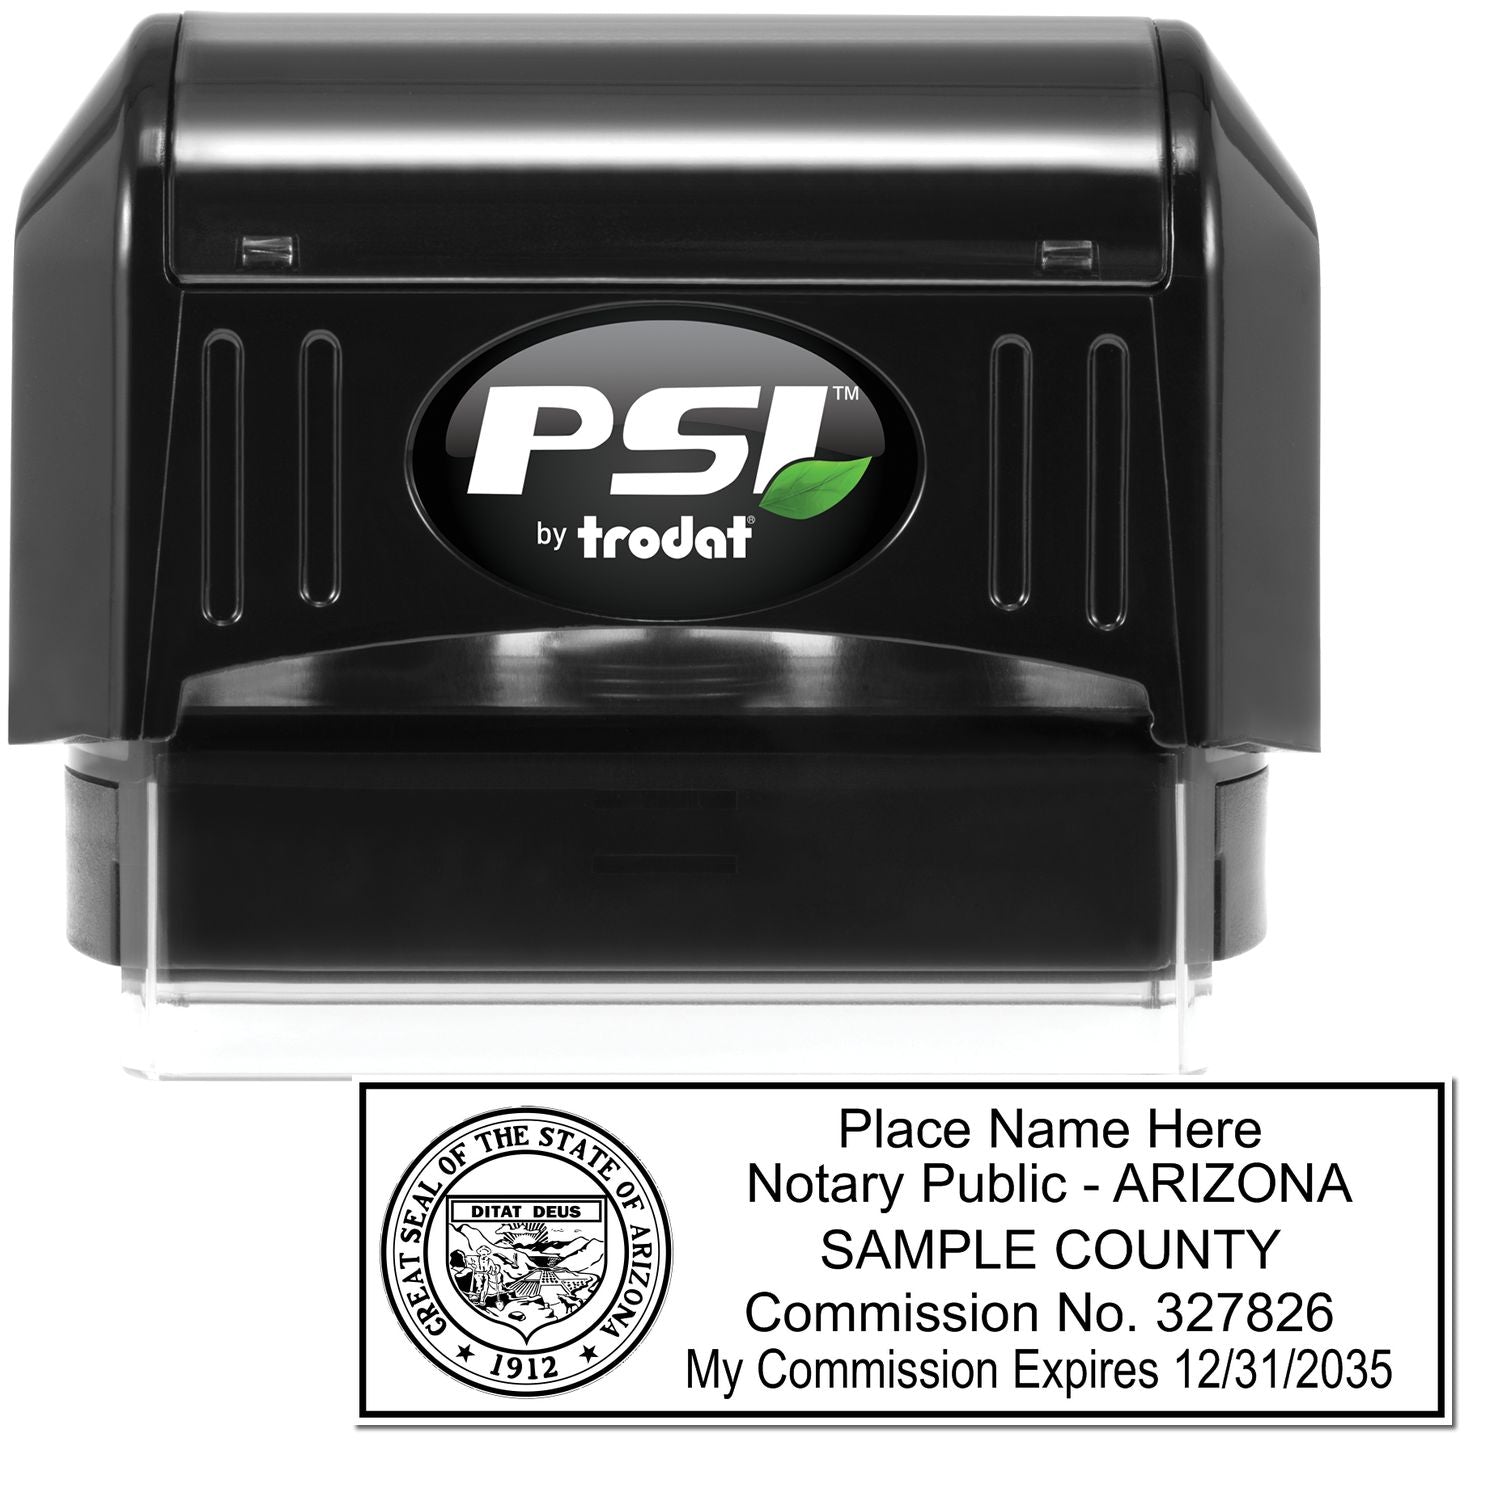 The main image for the PSI Arizona Notary Stamp depicting a sample of the imprint and electronic files